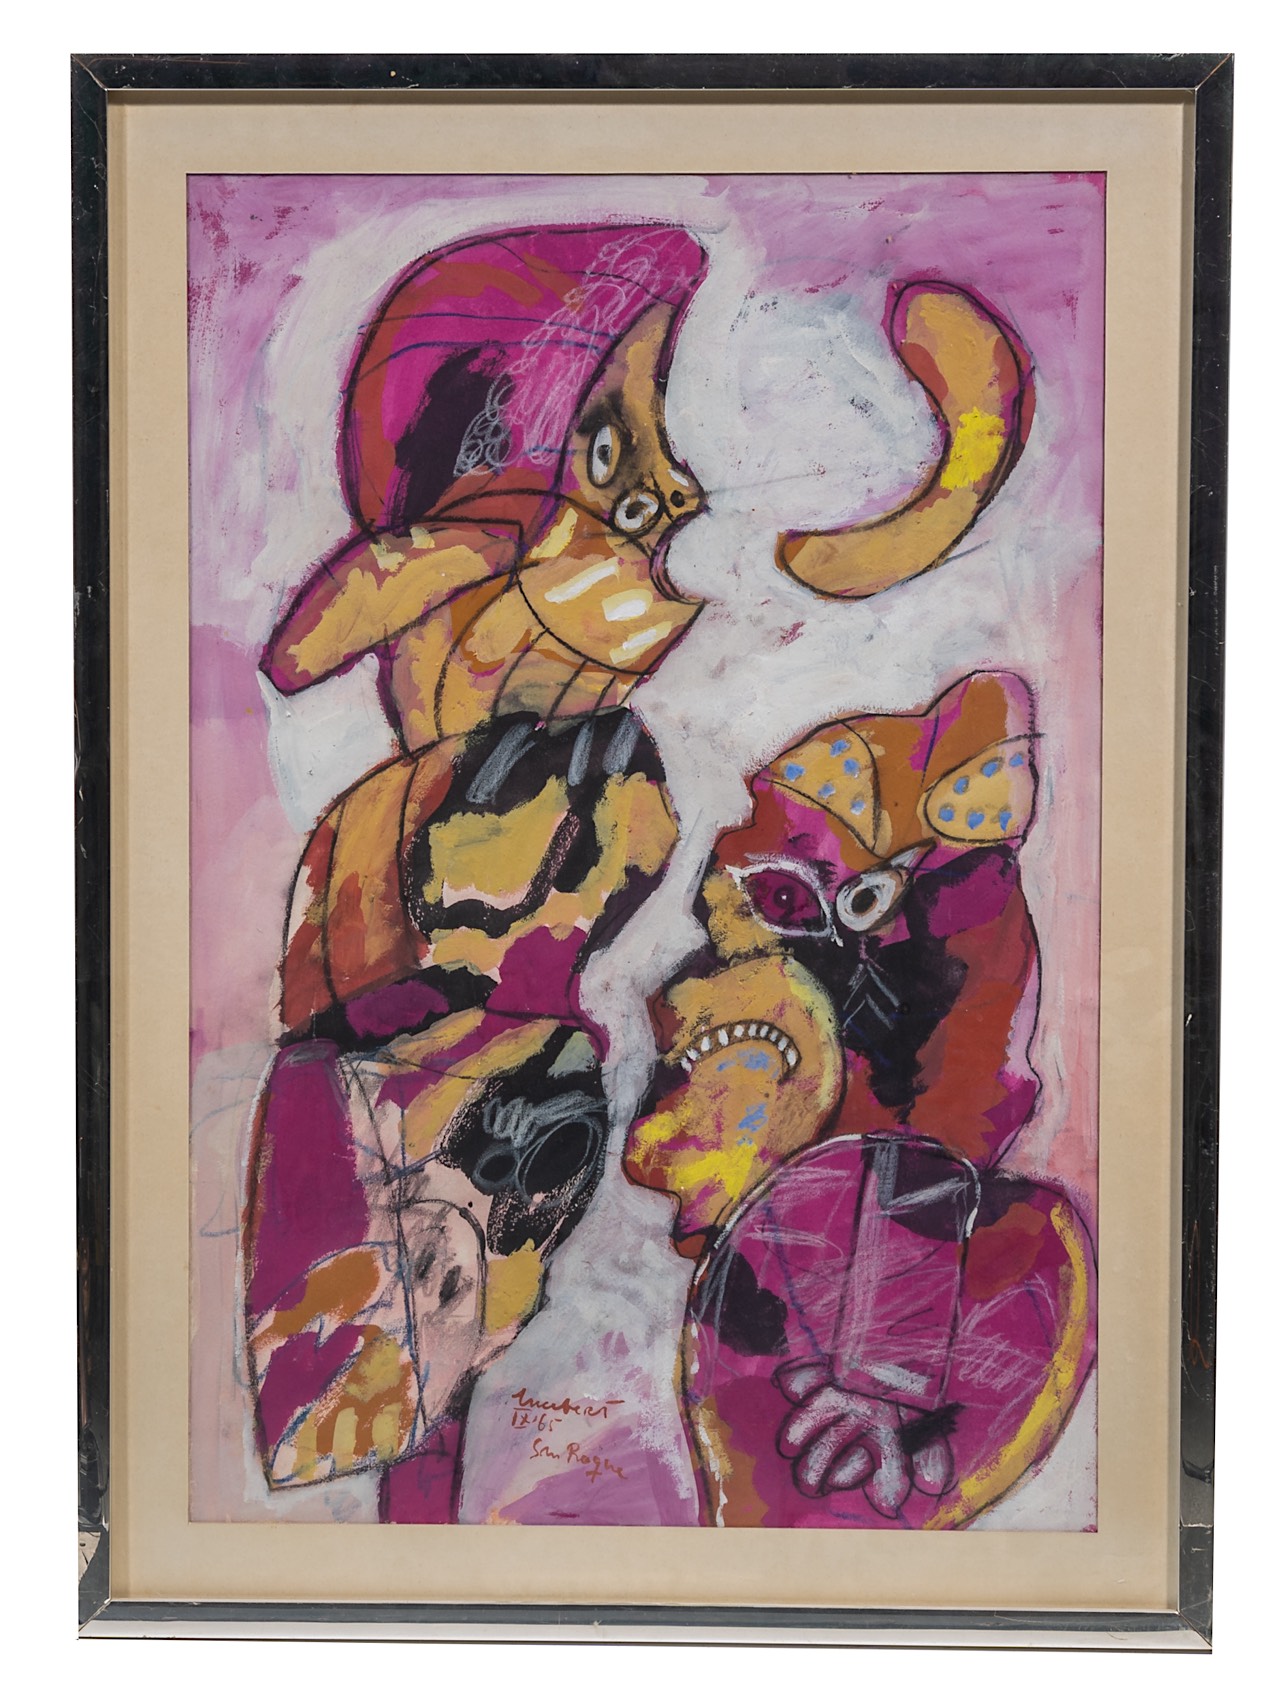 Lucebert (1924-1994), 'San Roque', 1965, pastel and gouache on paper 77 x 52 cm. (30.3 x 20.4 in.), - Image 2 of 6